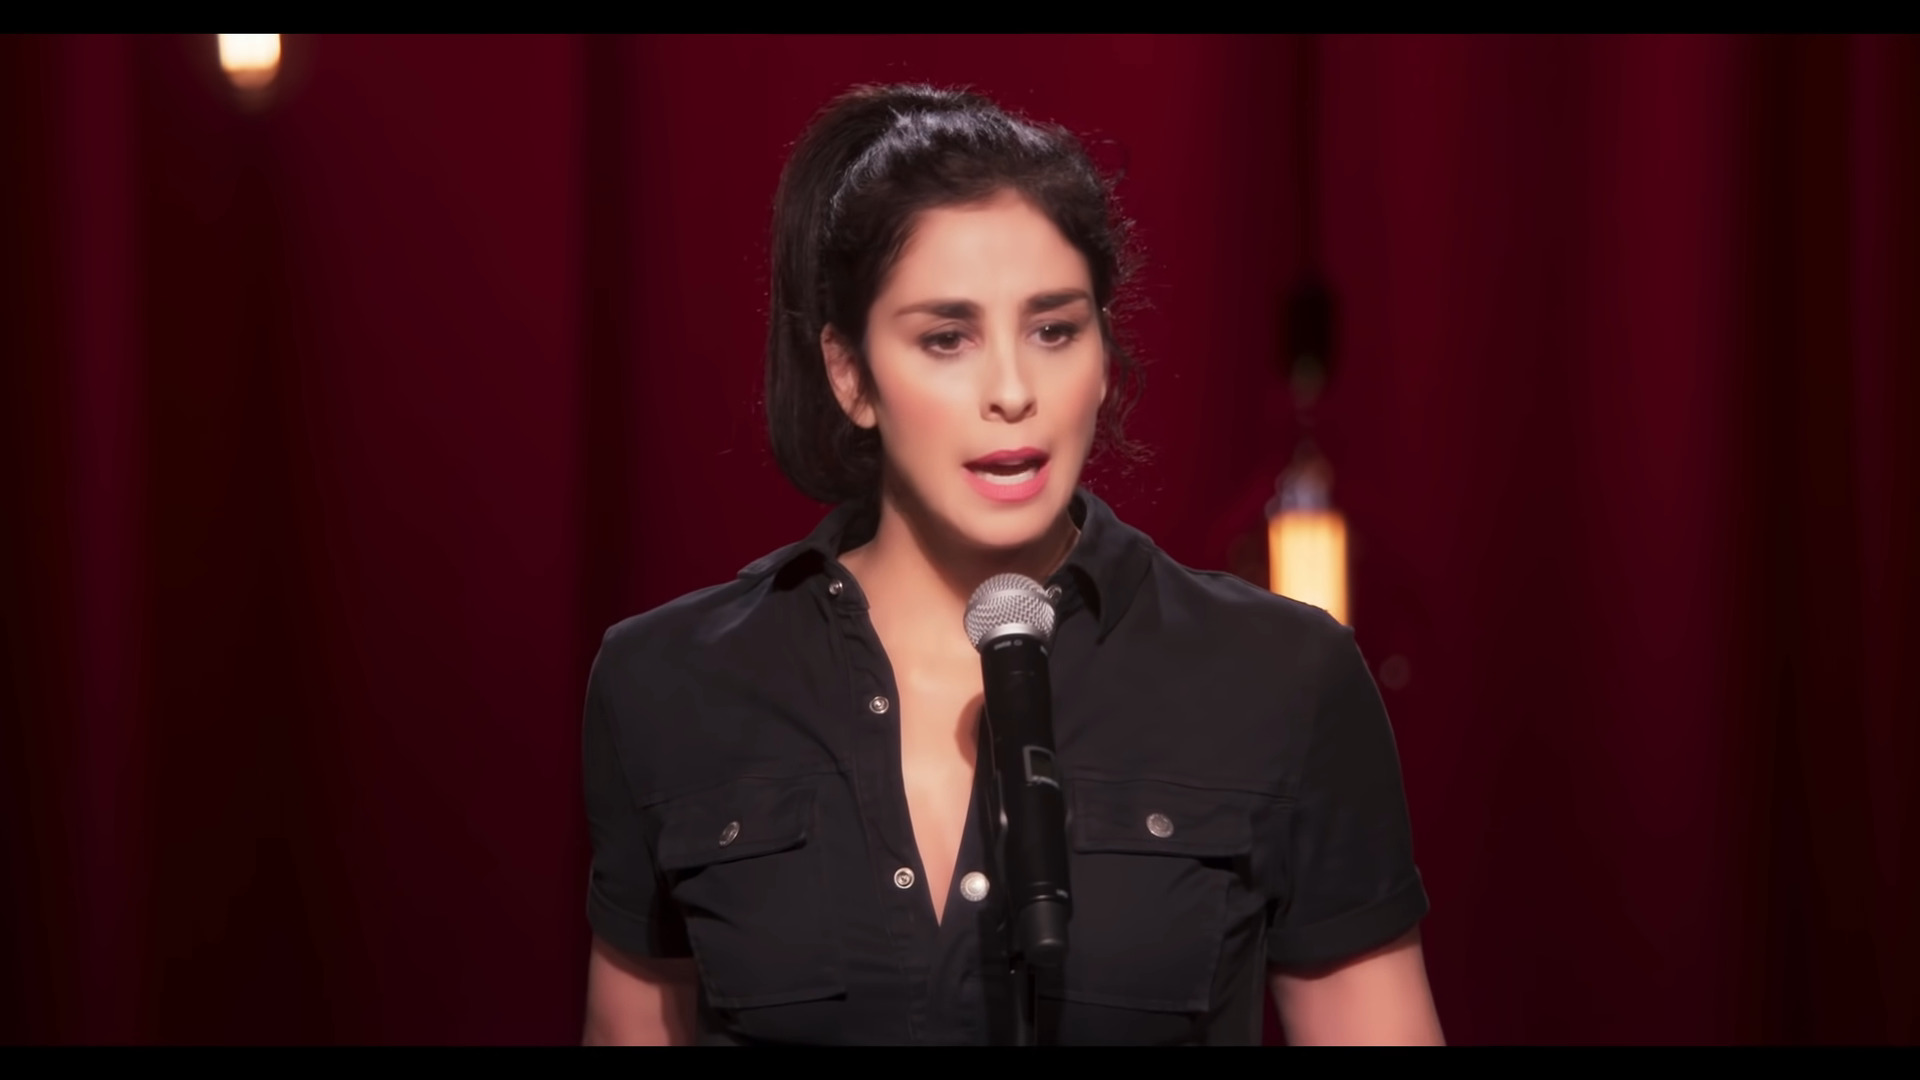 Sarah Silverman recounts a past experience for her Netflix special A Speck of Dust